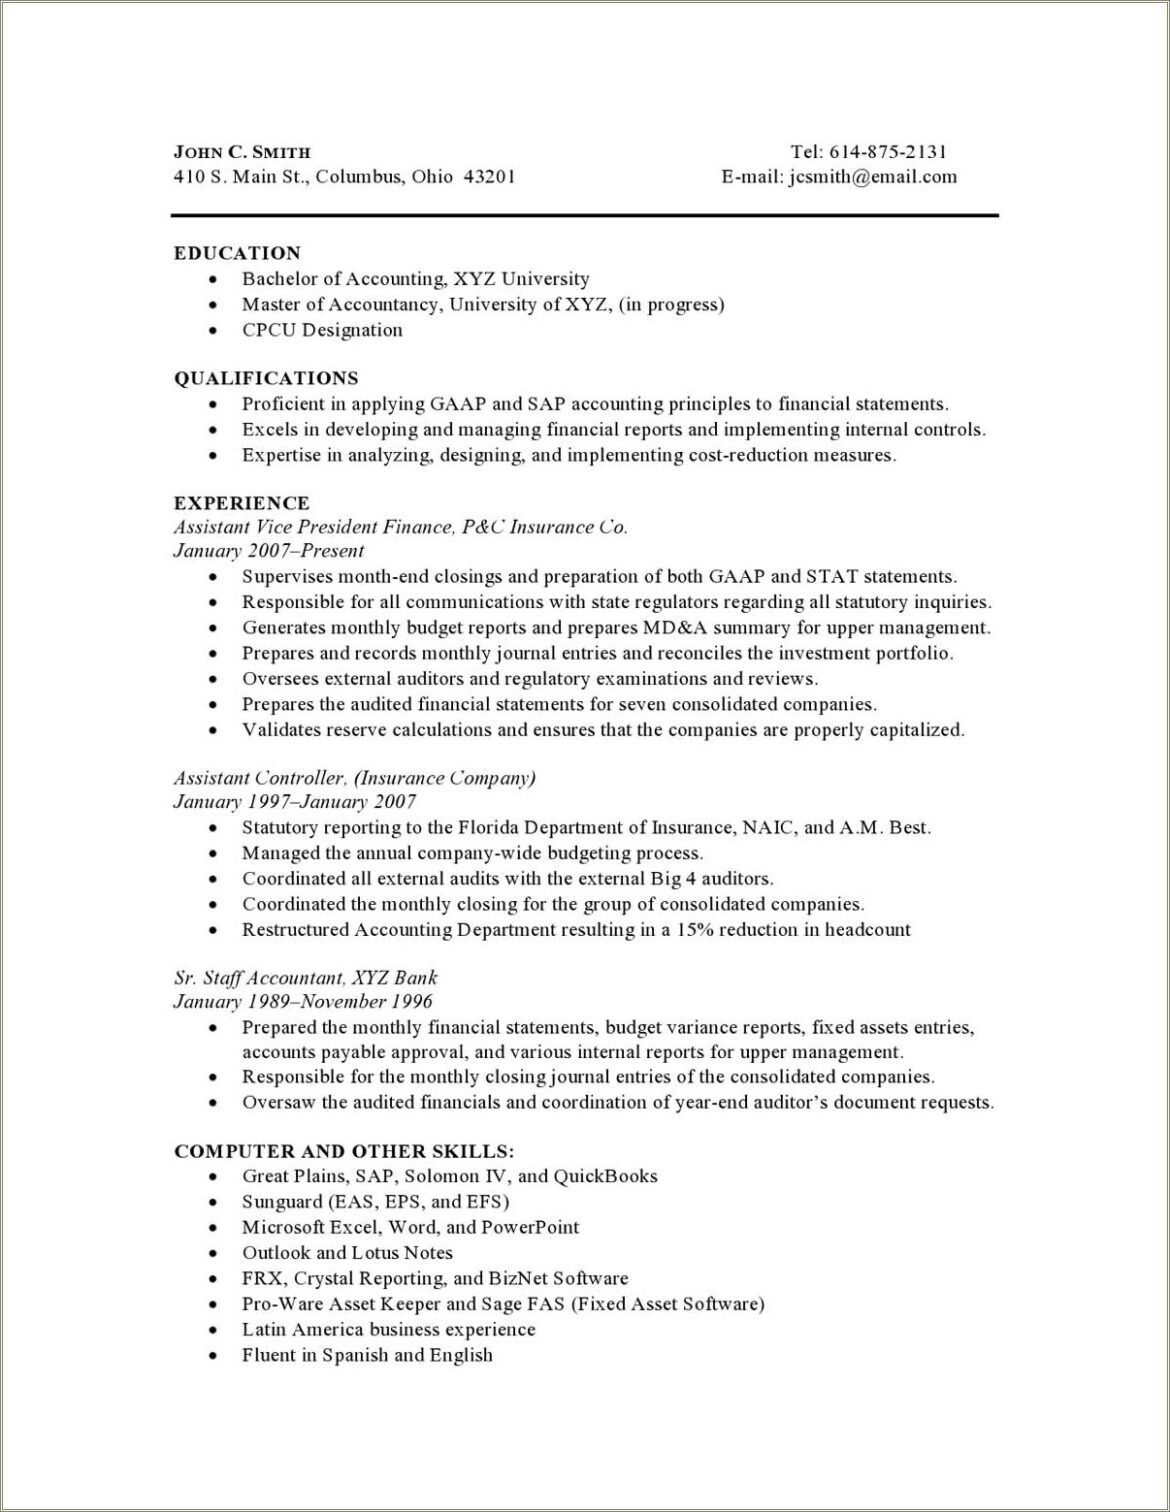 Sample Resume With Big 4 Experience